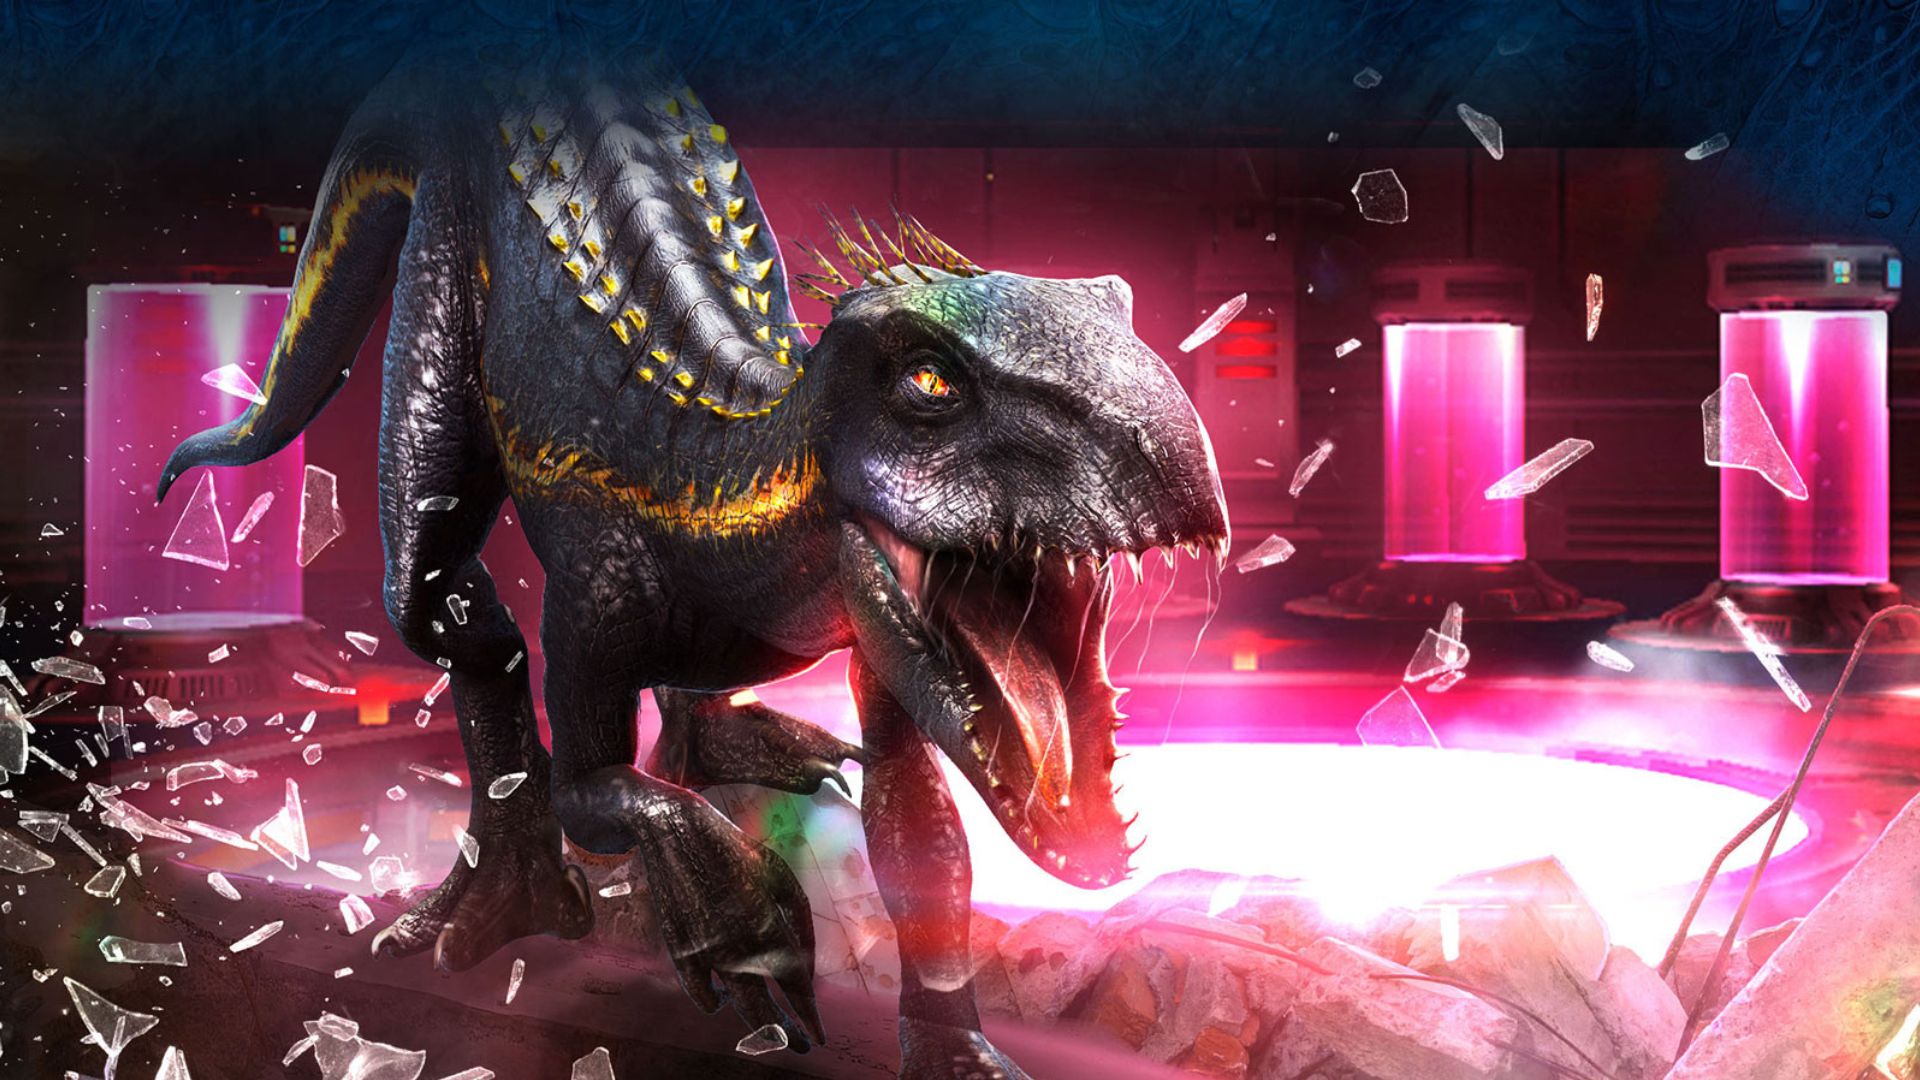 Jurassic World games - a t-rex in a science experiment surrounded by red lights as it smashes some glass.